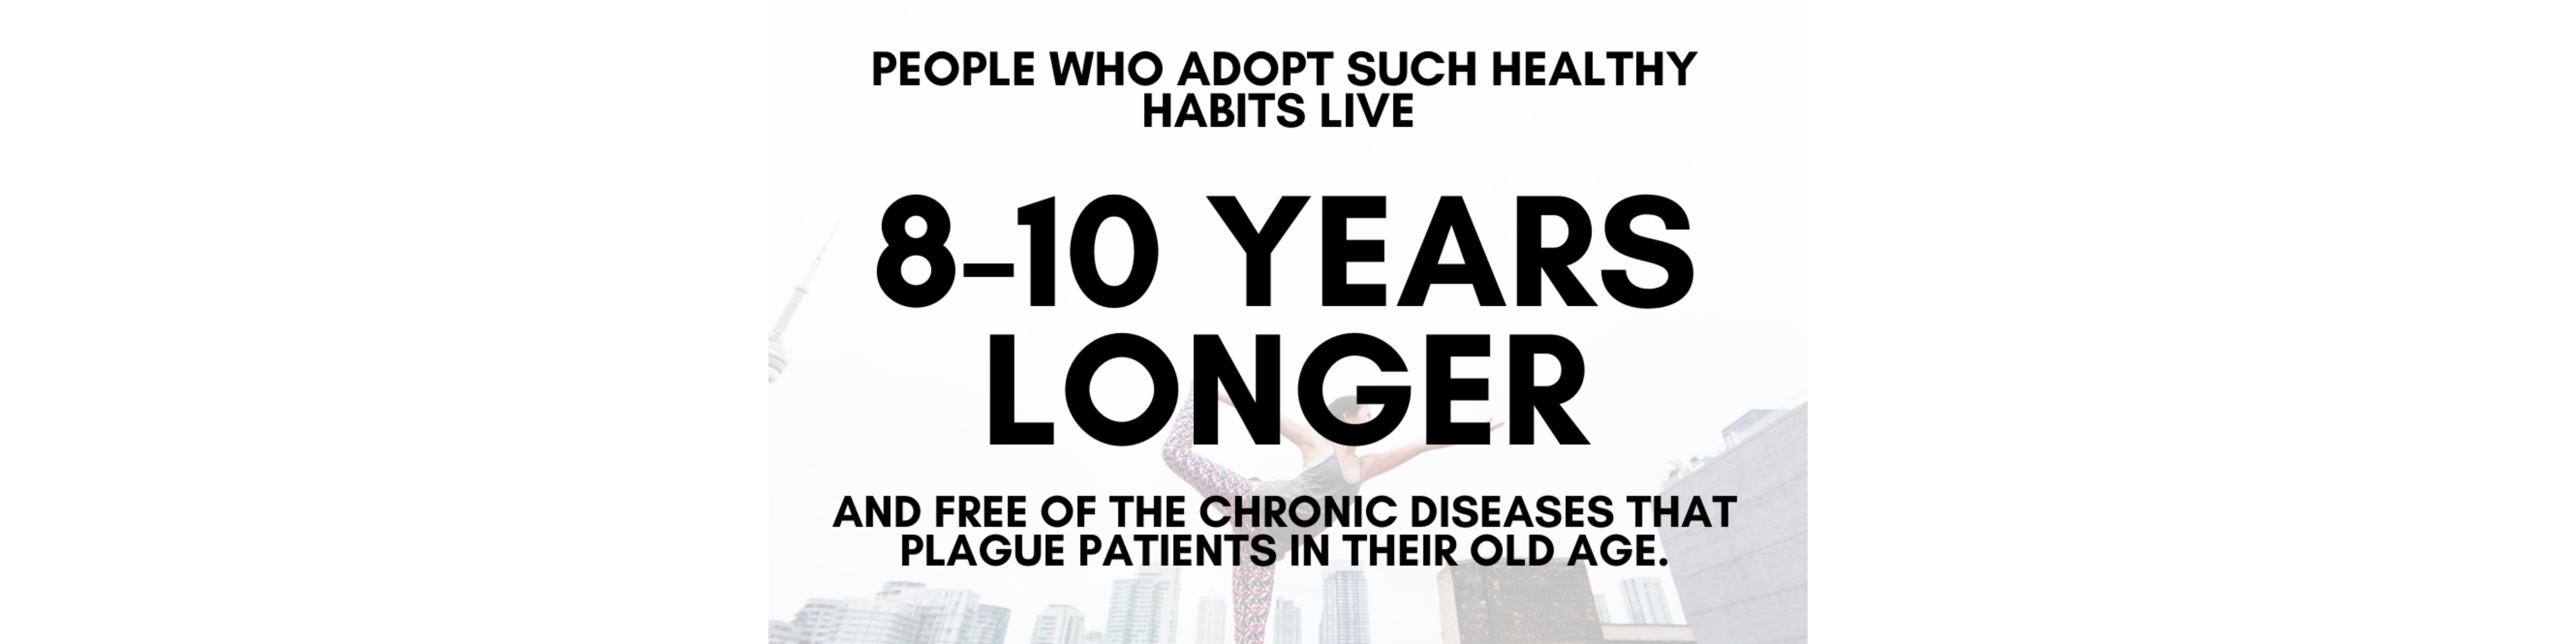 People who adopt healthy habits live 8-10 years longer